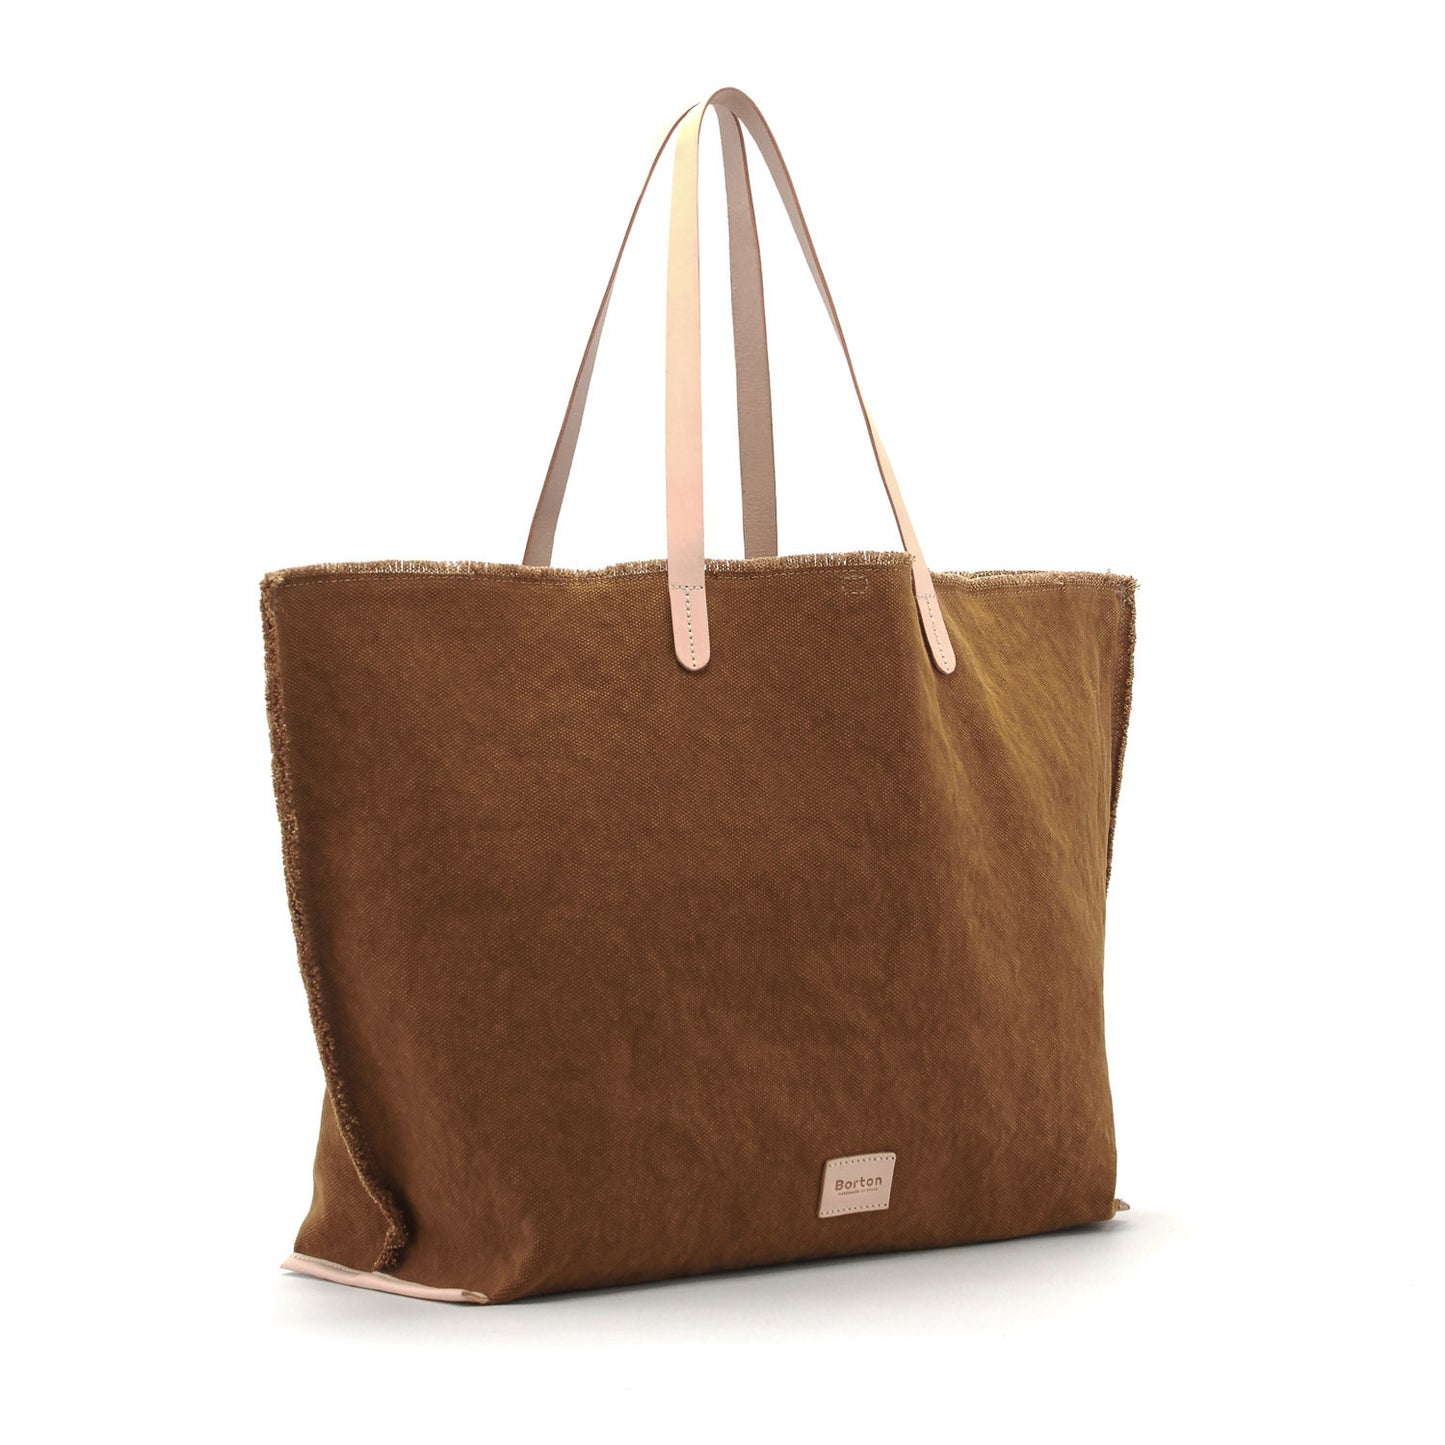 Mery Maxi Tote Tan Canvas & Natural Leather